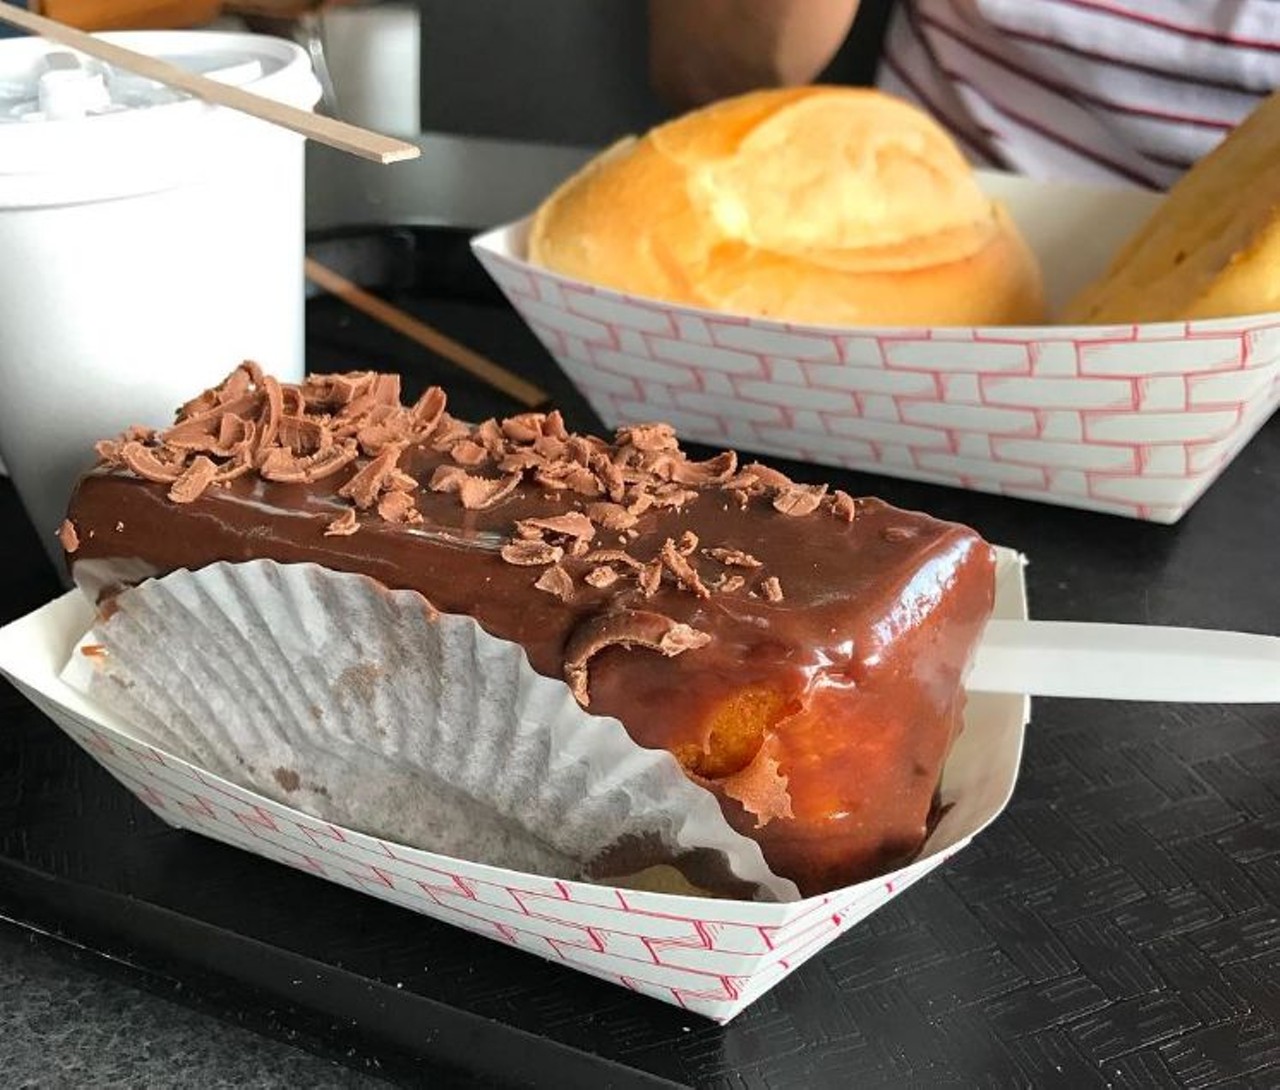 What we recommend: bolo de cenoura (carrot cake) 
"Pao gostoso" translates to tasty bread, and the bakery definitely has a wide variety. A classic choice is this carrot cake with chocolate icing. Pair it with a coffee, and see if you&#146;re not ready to try another sweet treat.
Photo via karolynezeidan/Instagram